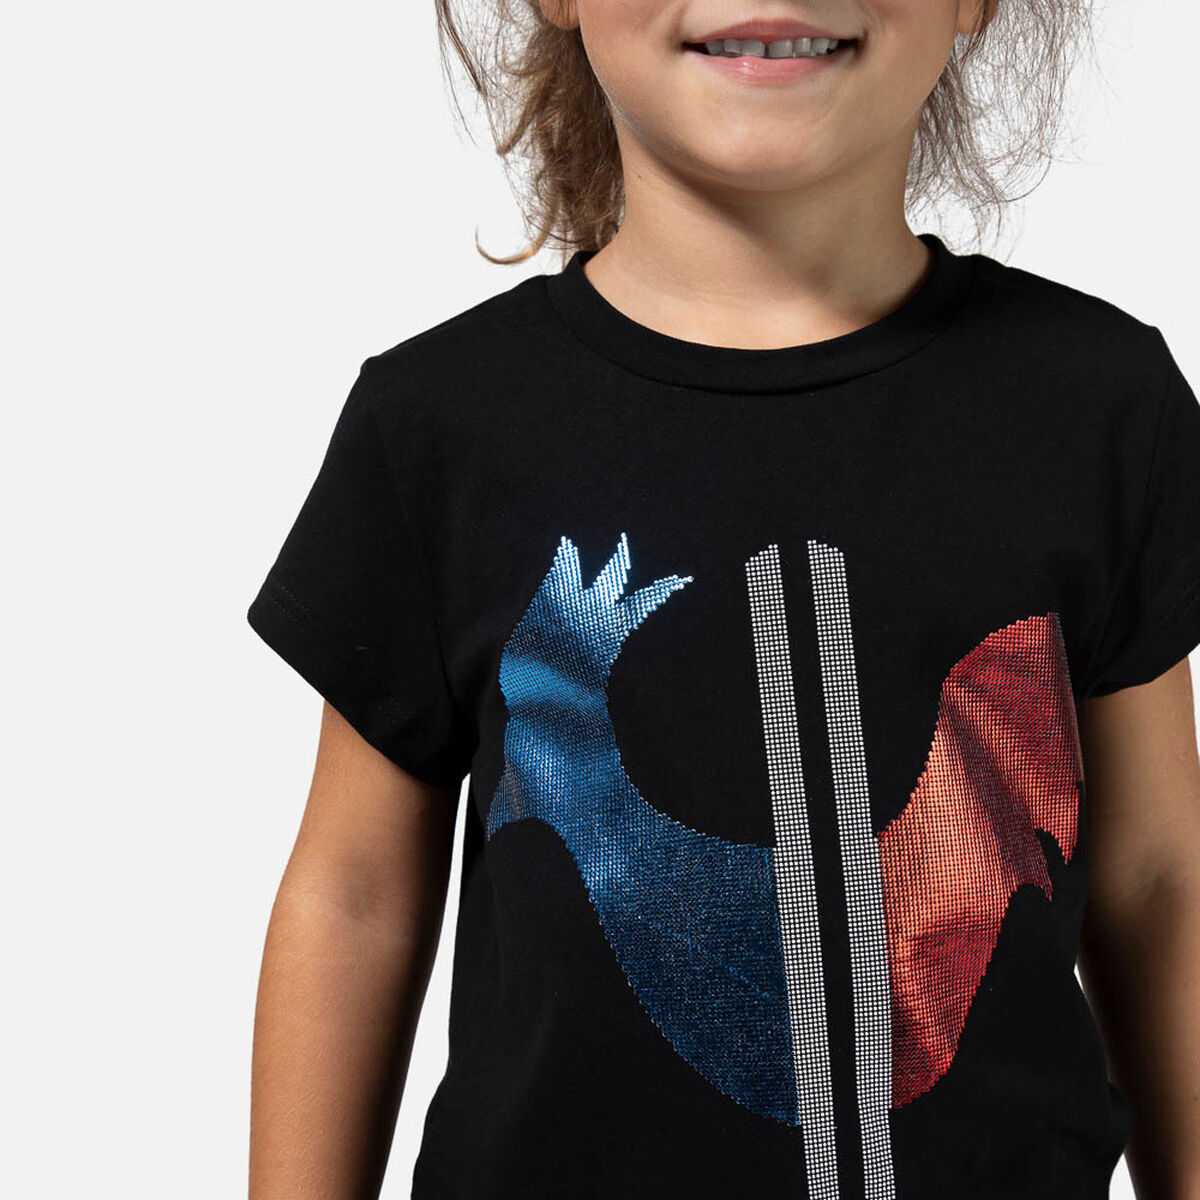 Girls' Rooster Tee